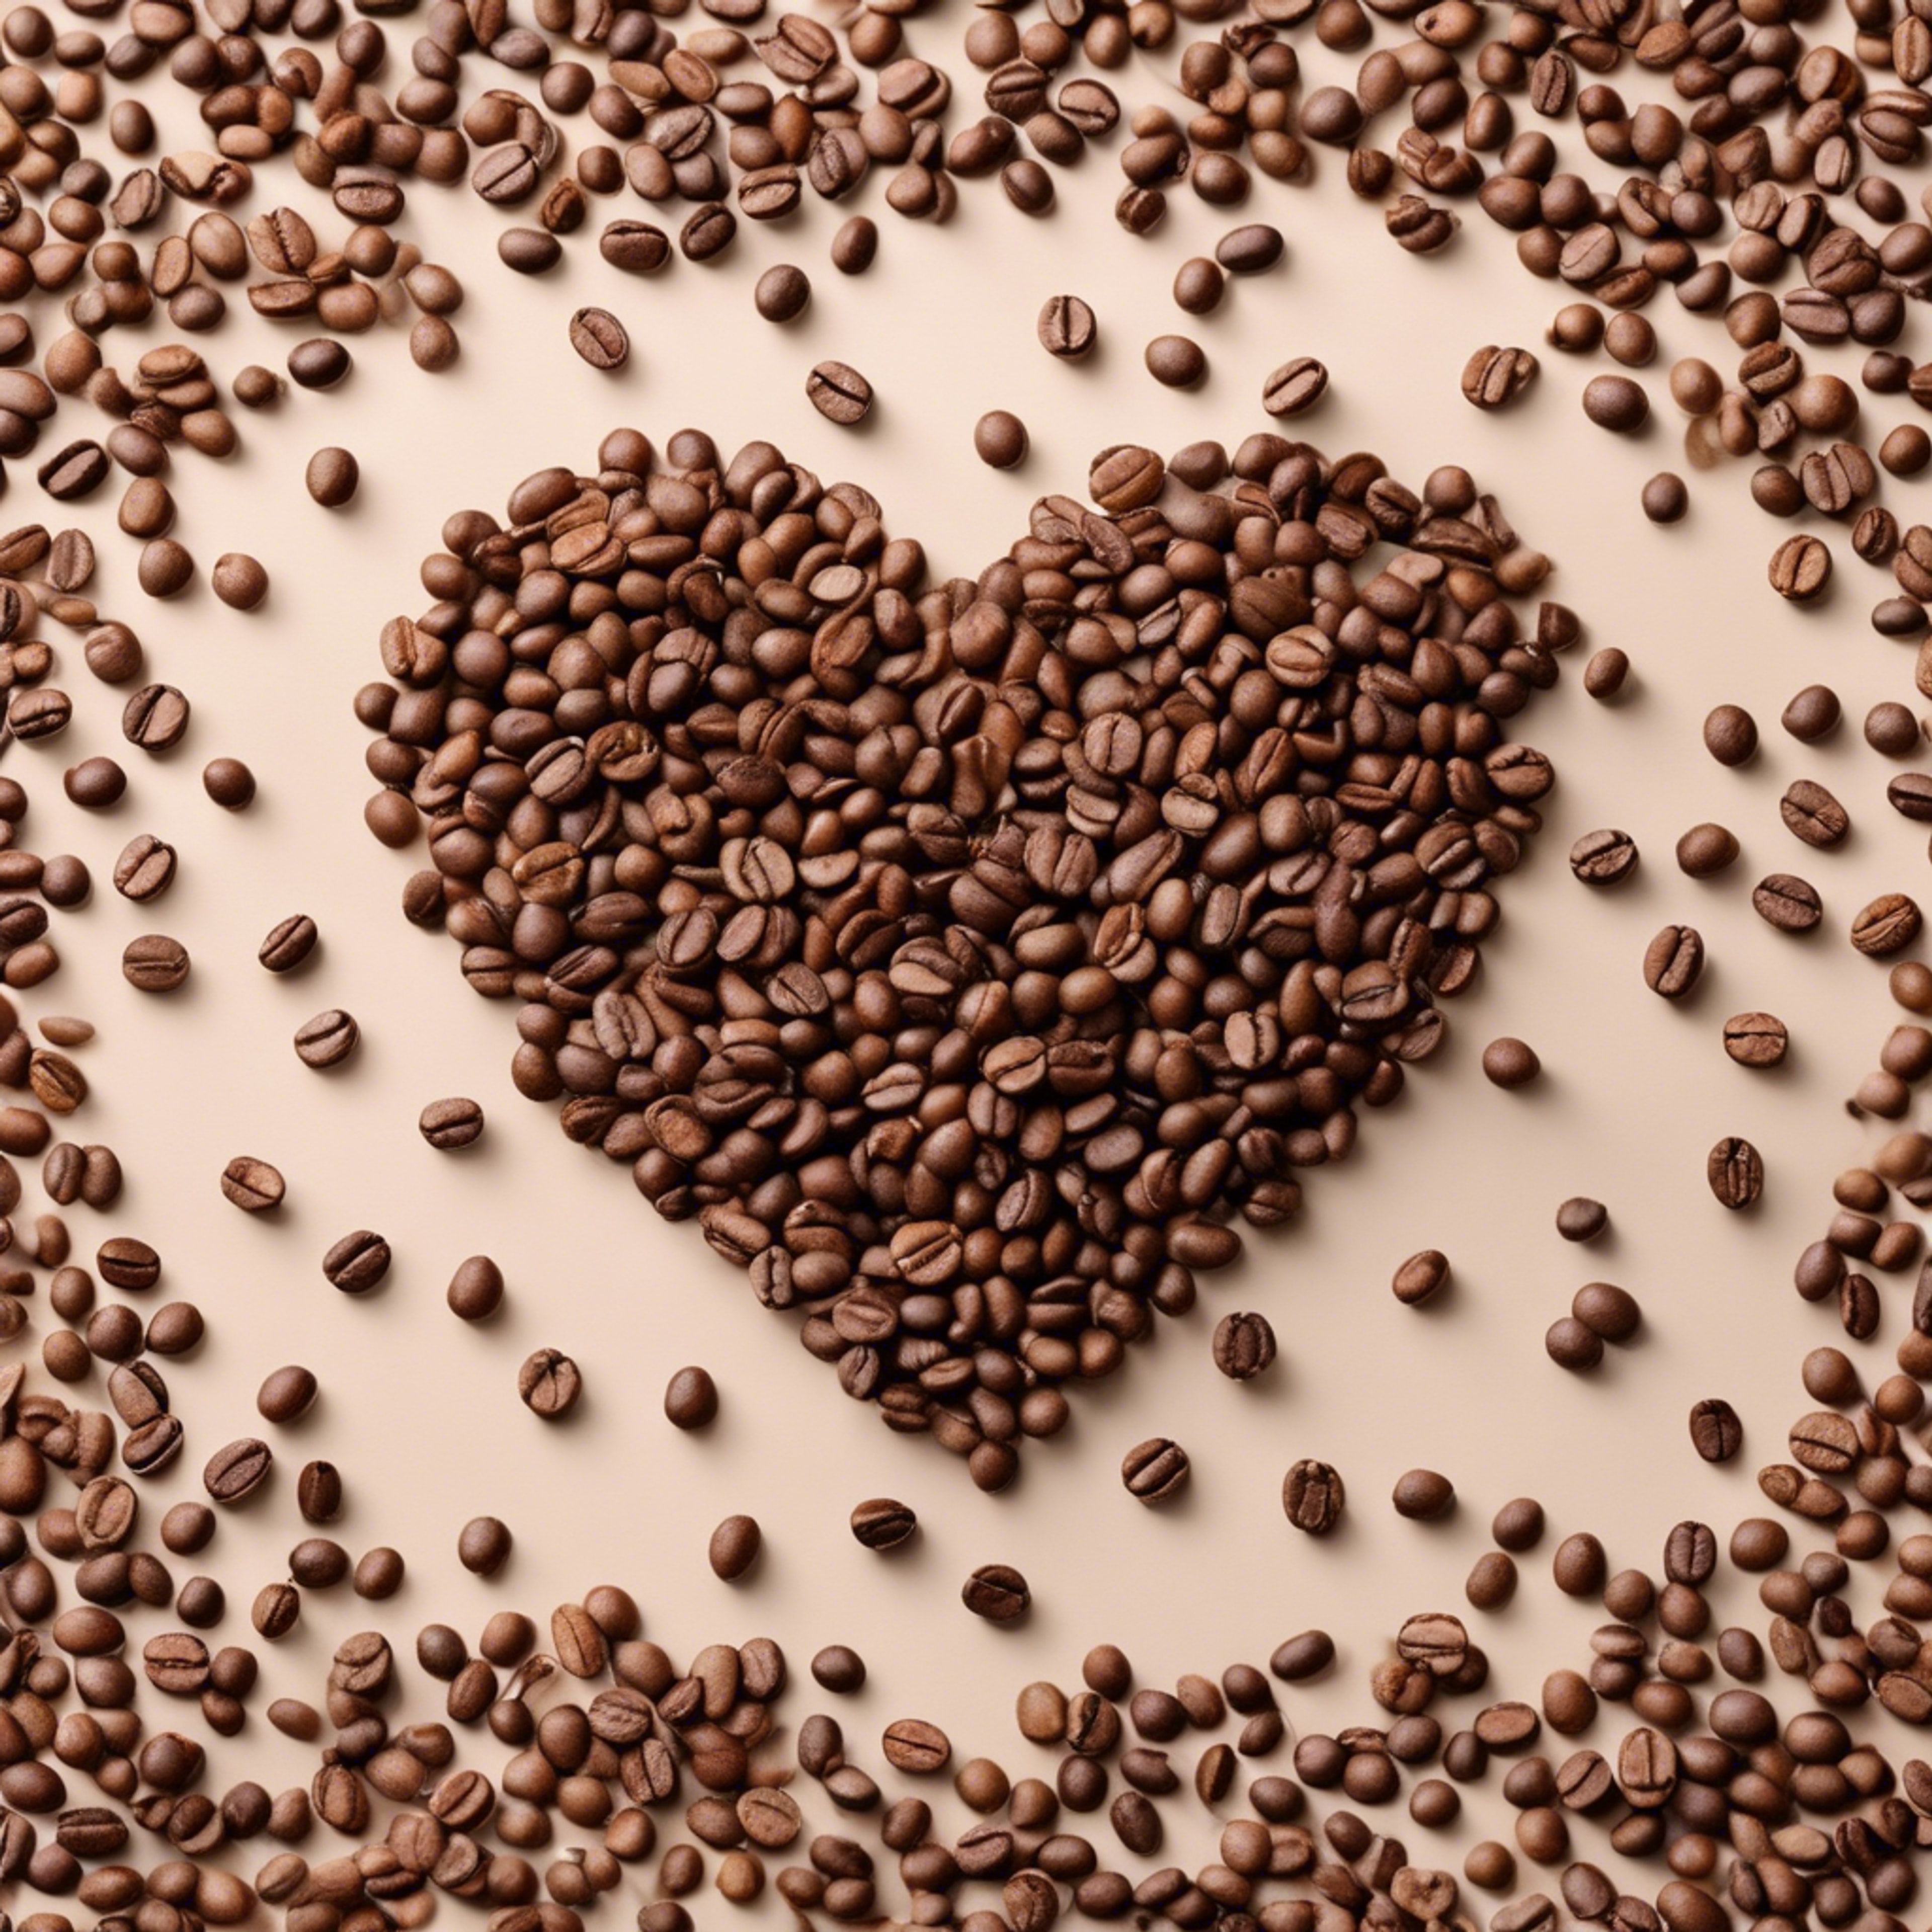 A heart formed by interlocking brown coffee beans on a light background.壁紙[fa70543eaeaa4421b5f5]